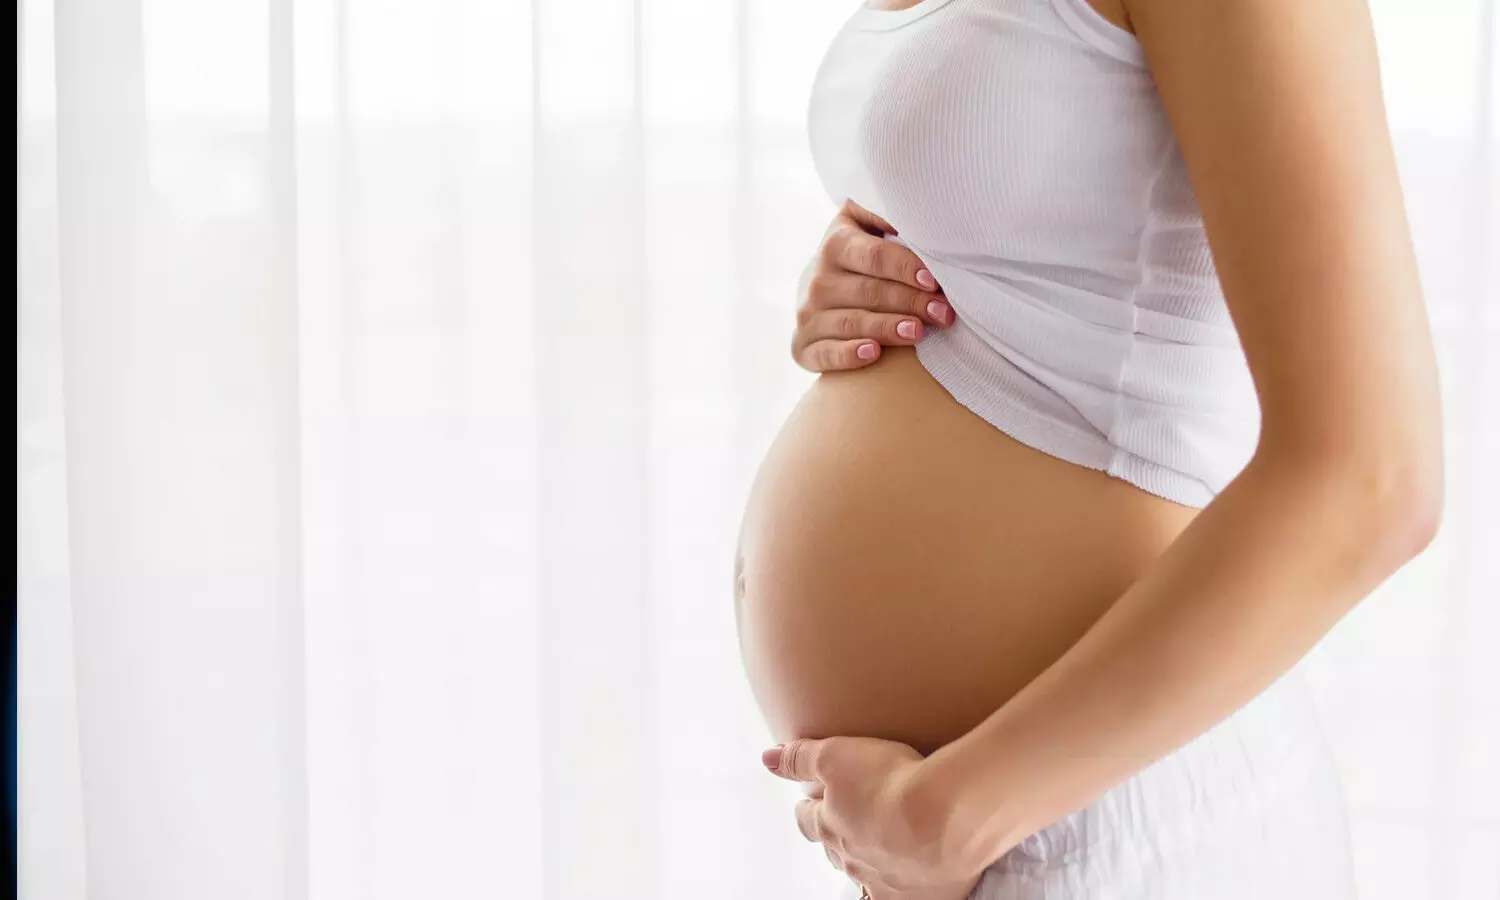 First delivery by C-section may reduce chances to conceive second child